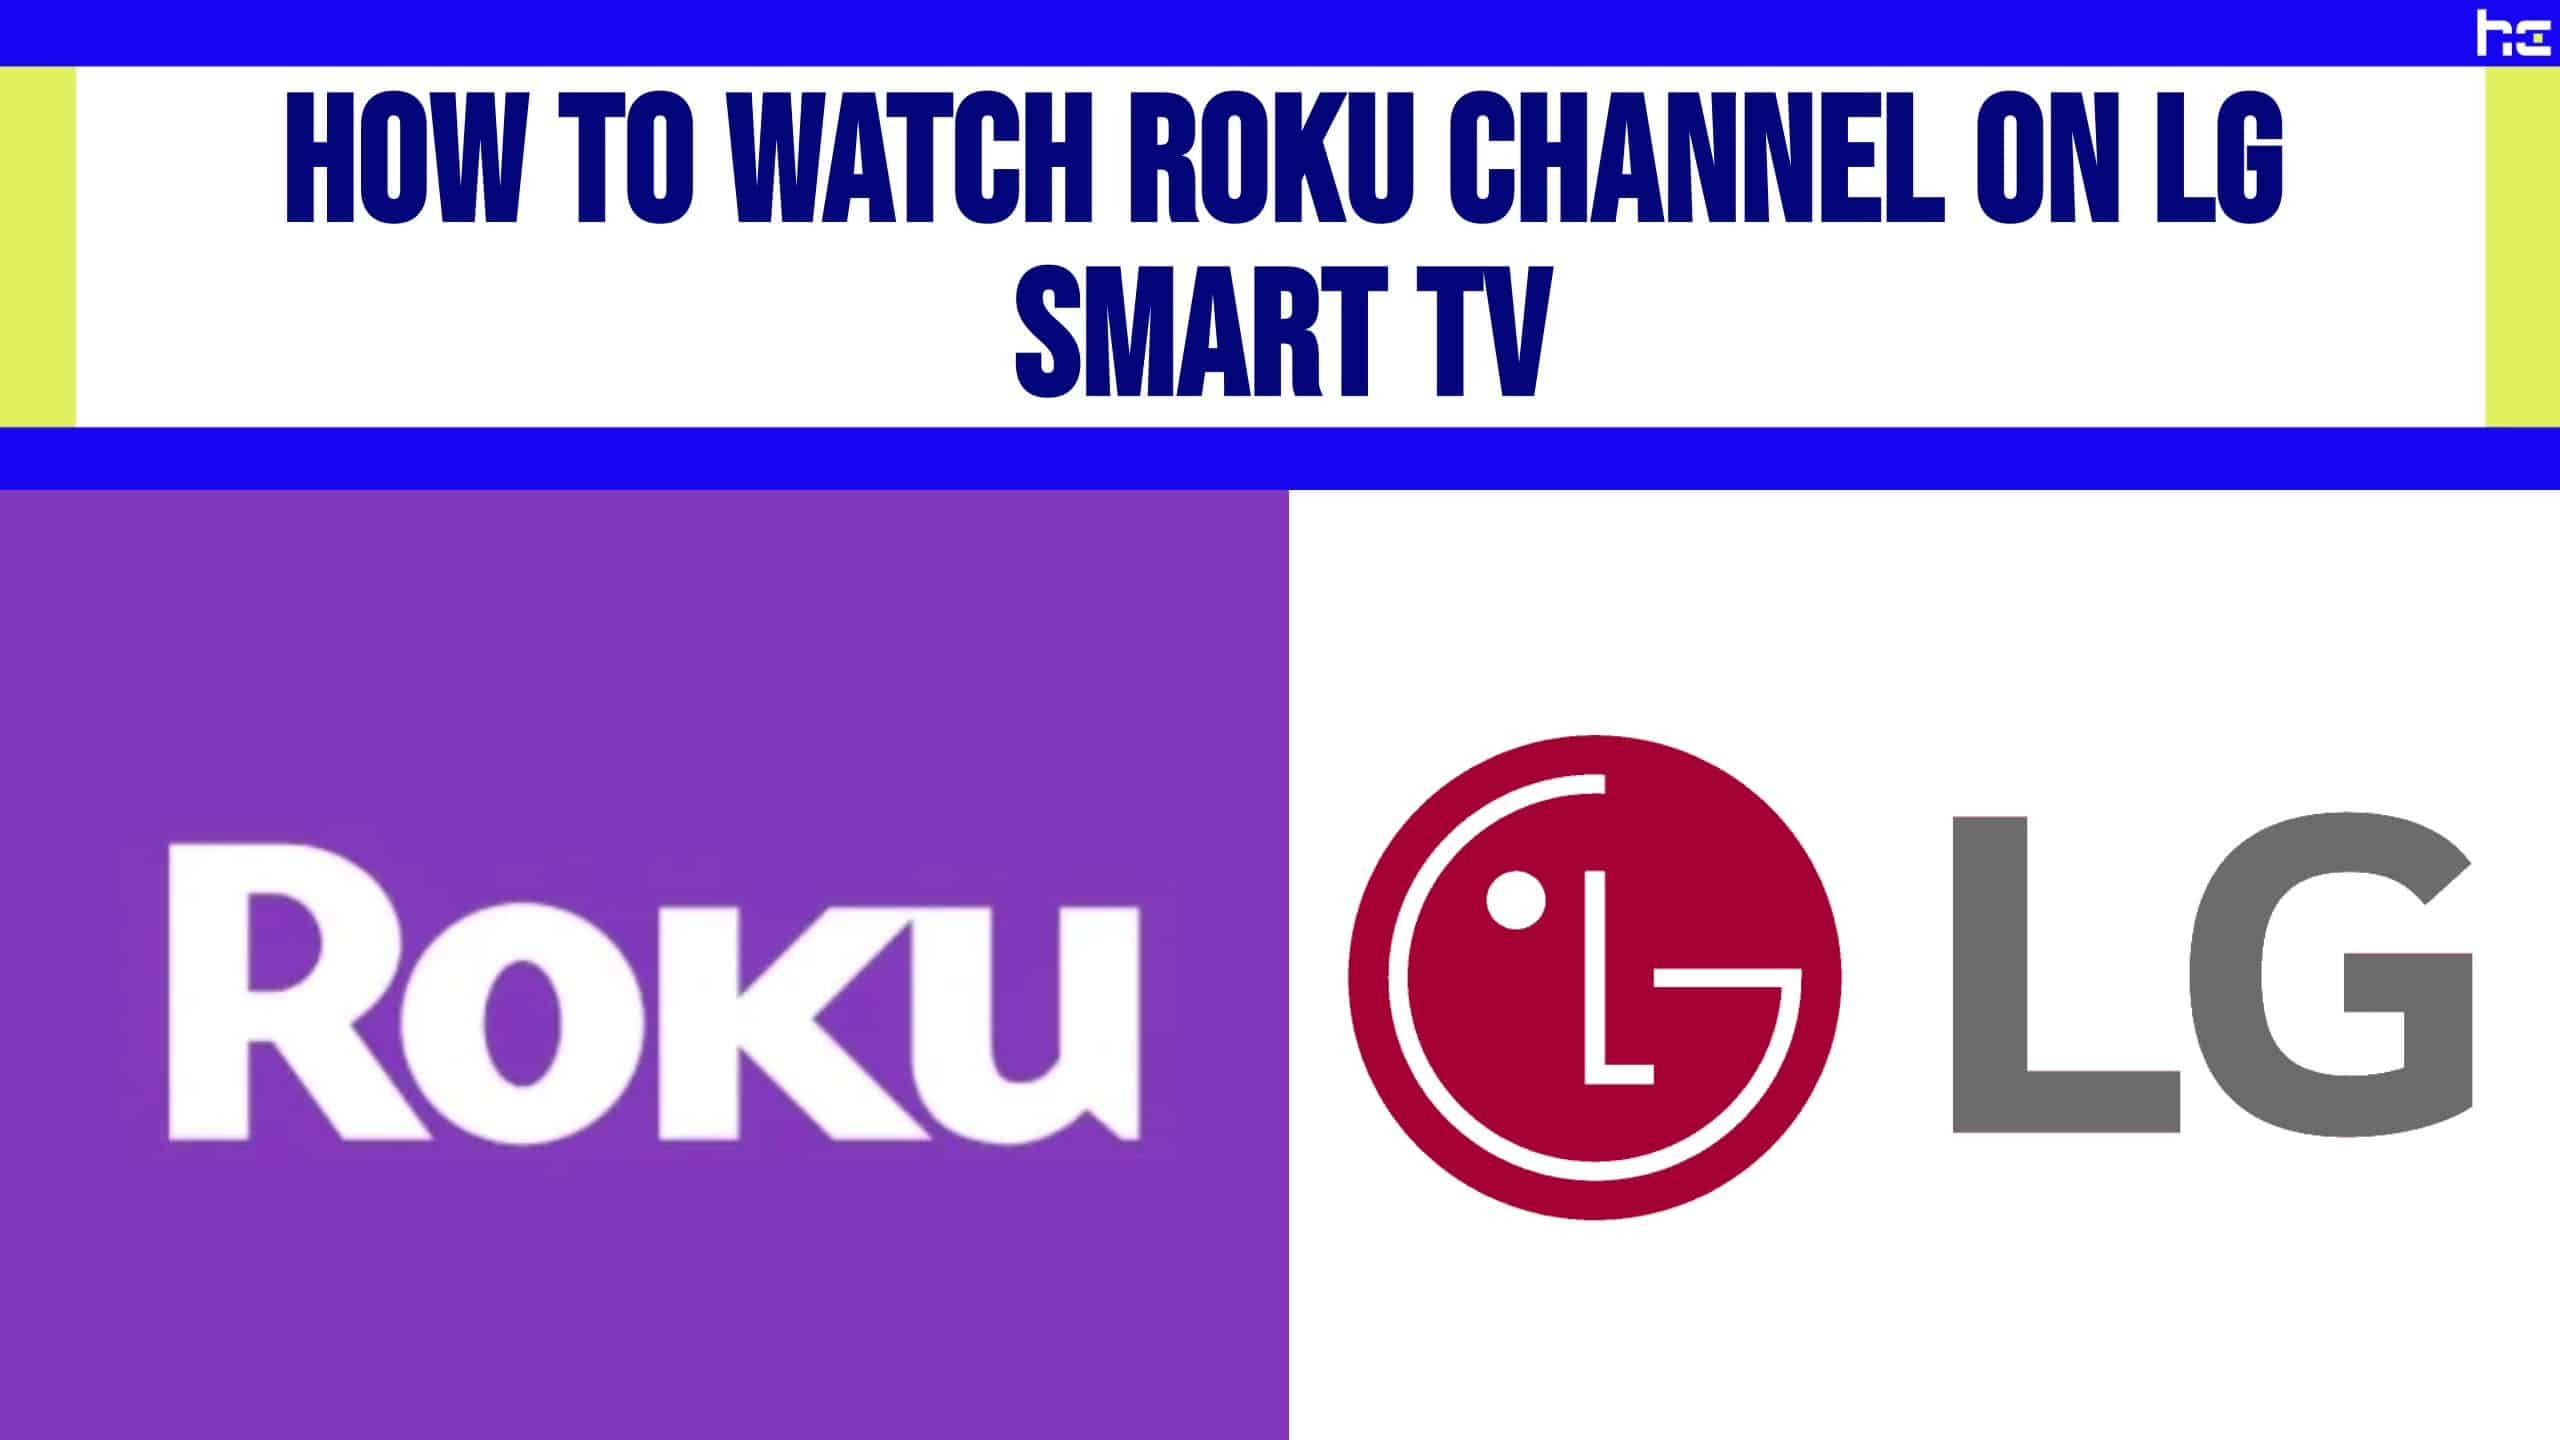 How to Watch Roku Channel on LG Smart TV with logos